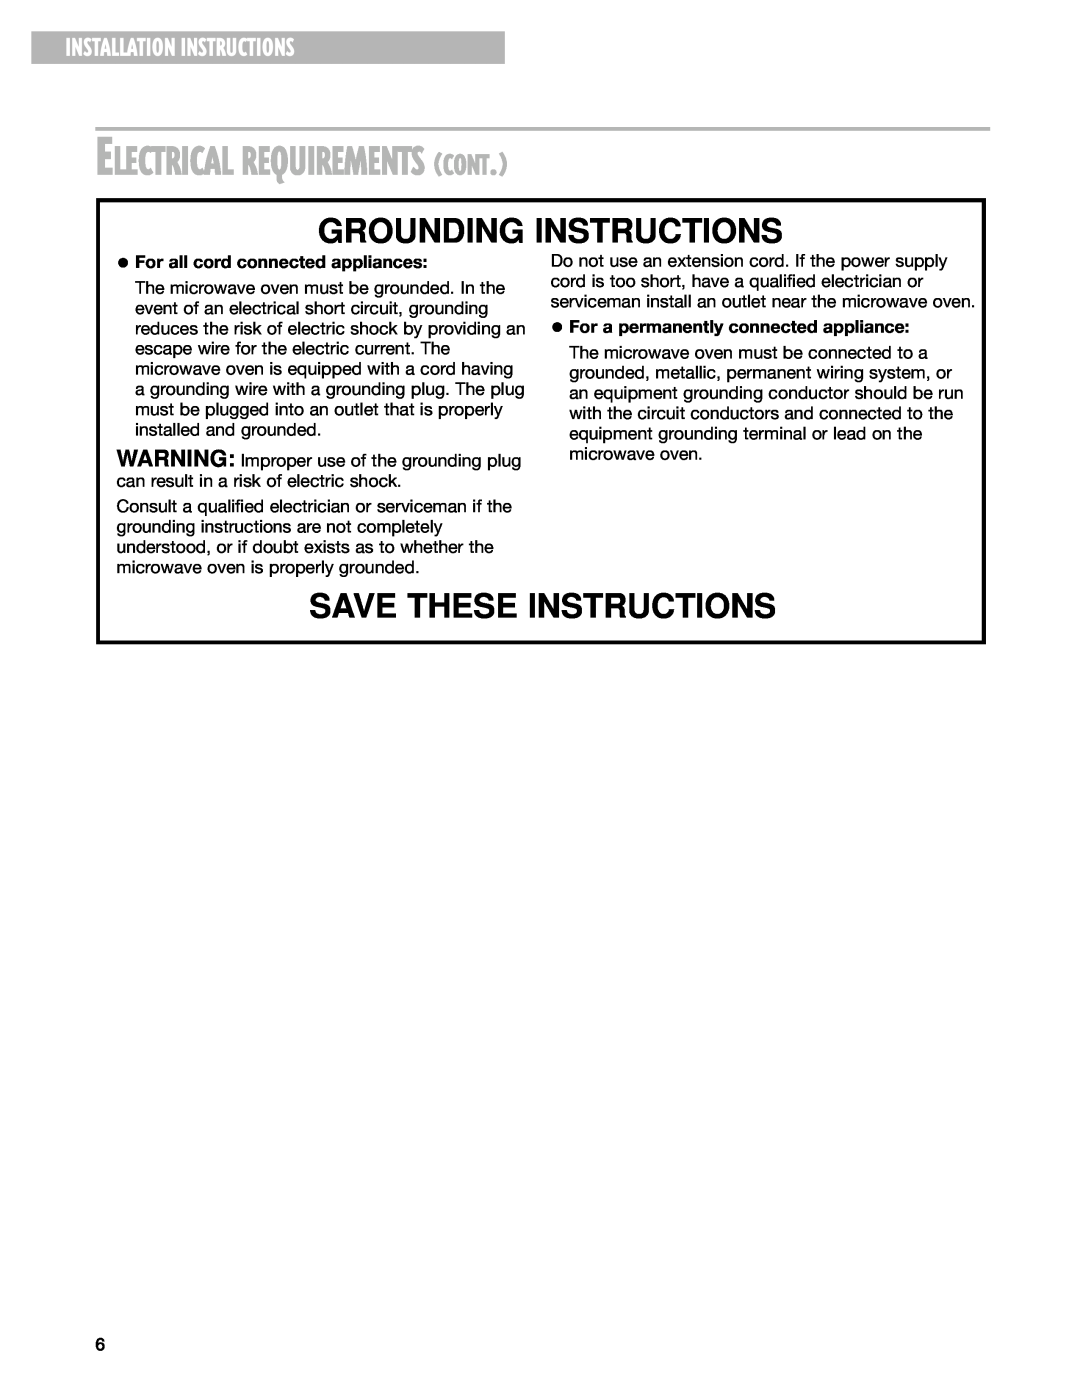 Whirlpool MT3100SH, MT3130SH Electrical Requirements Cont, Grounding Instructions, Installation Instructions 